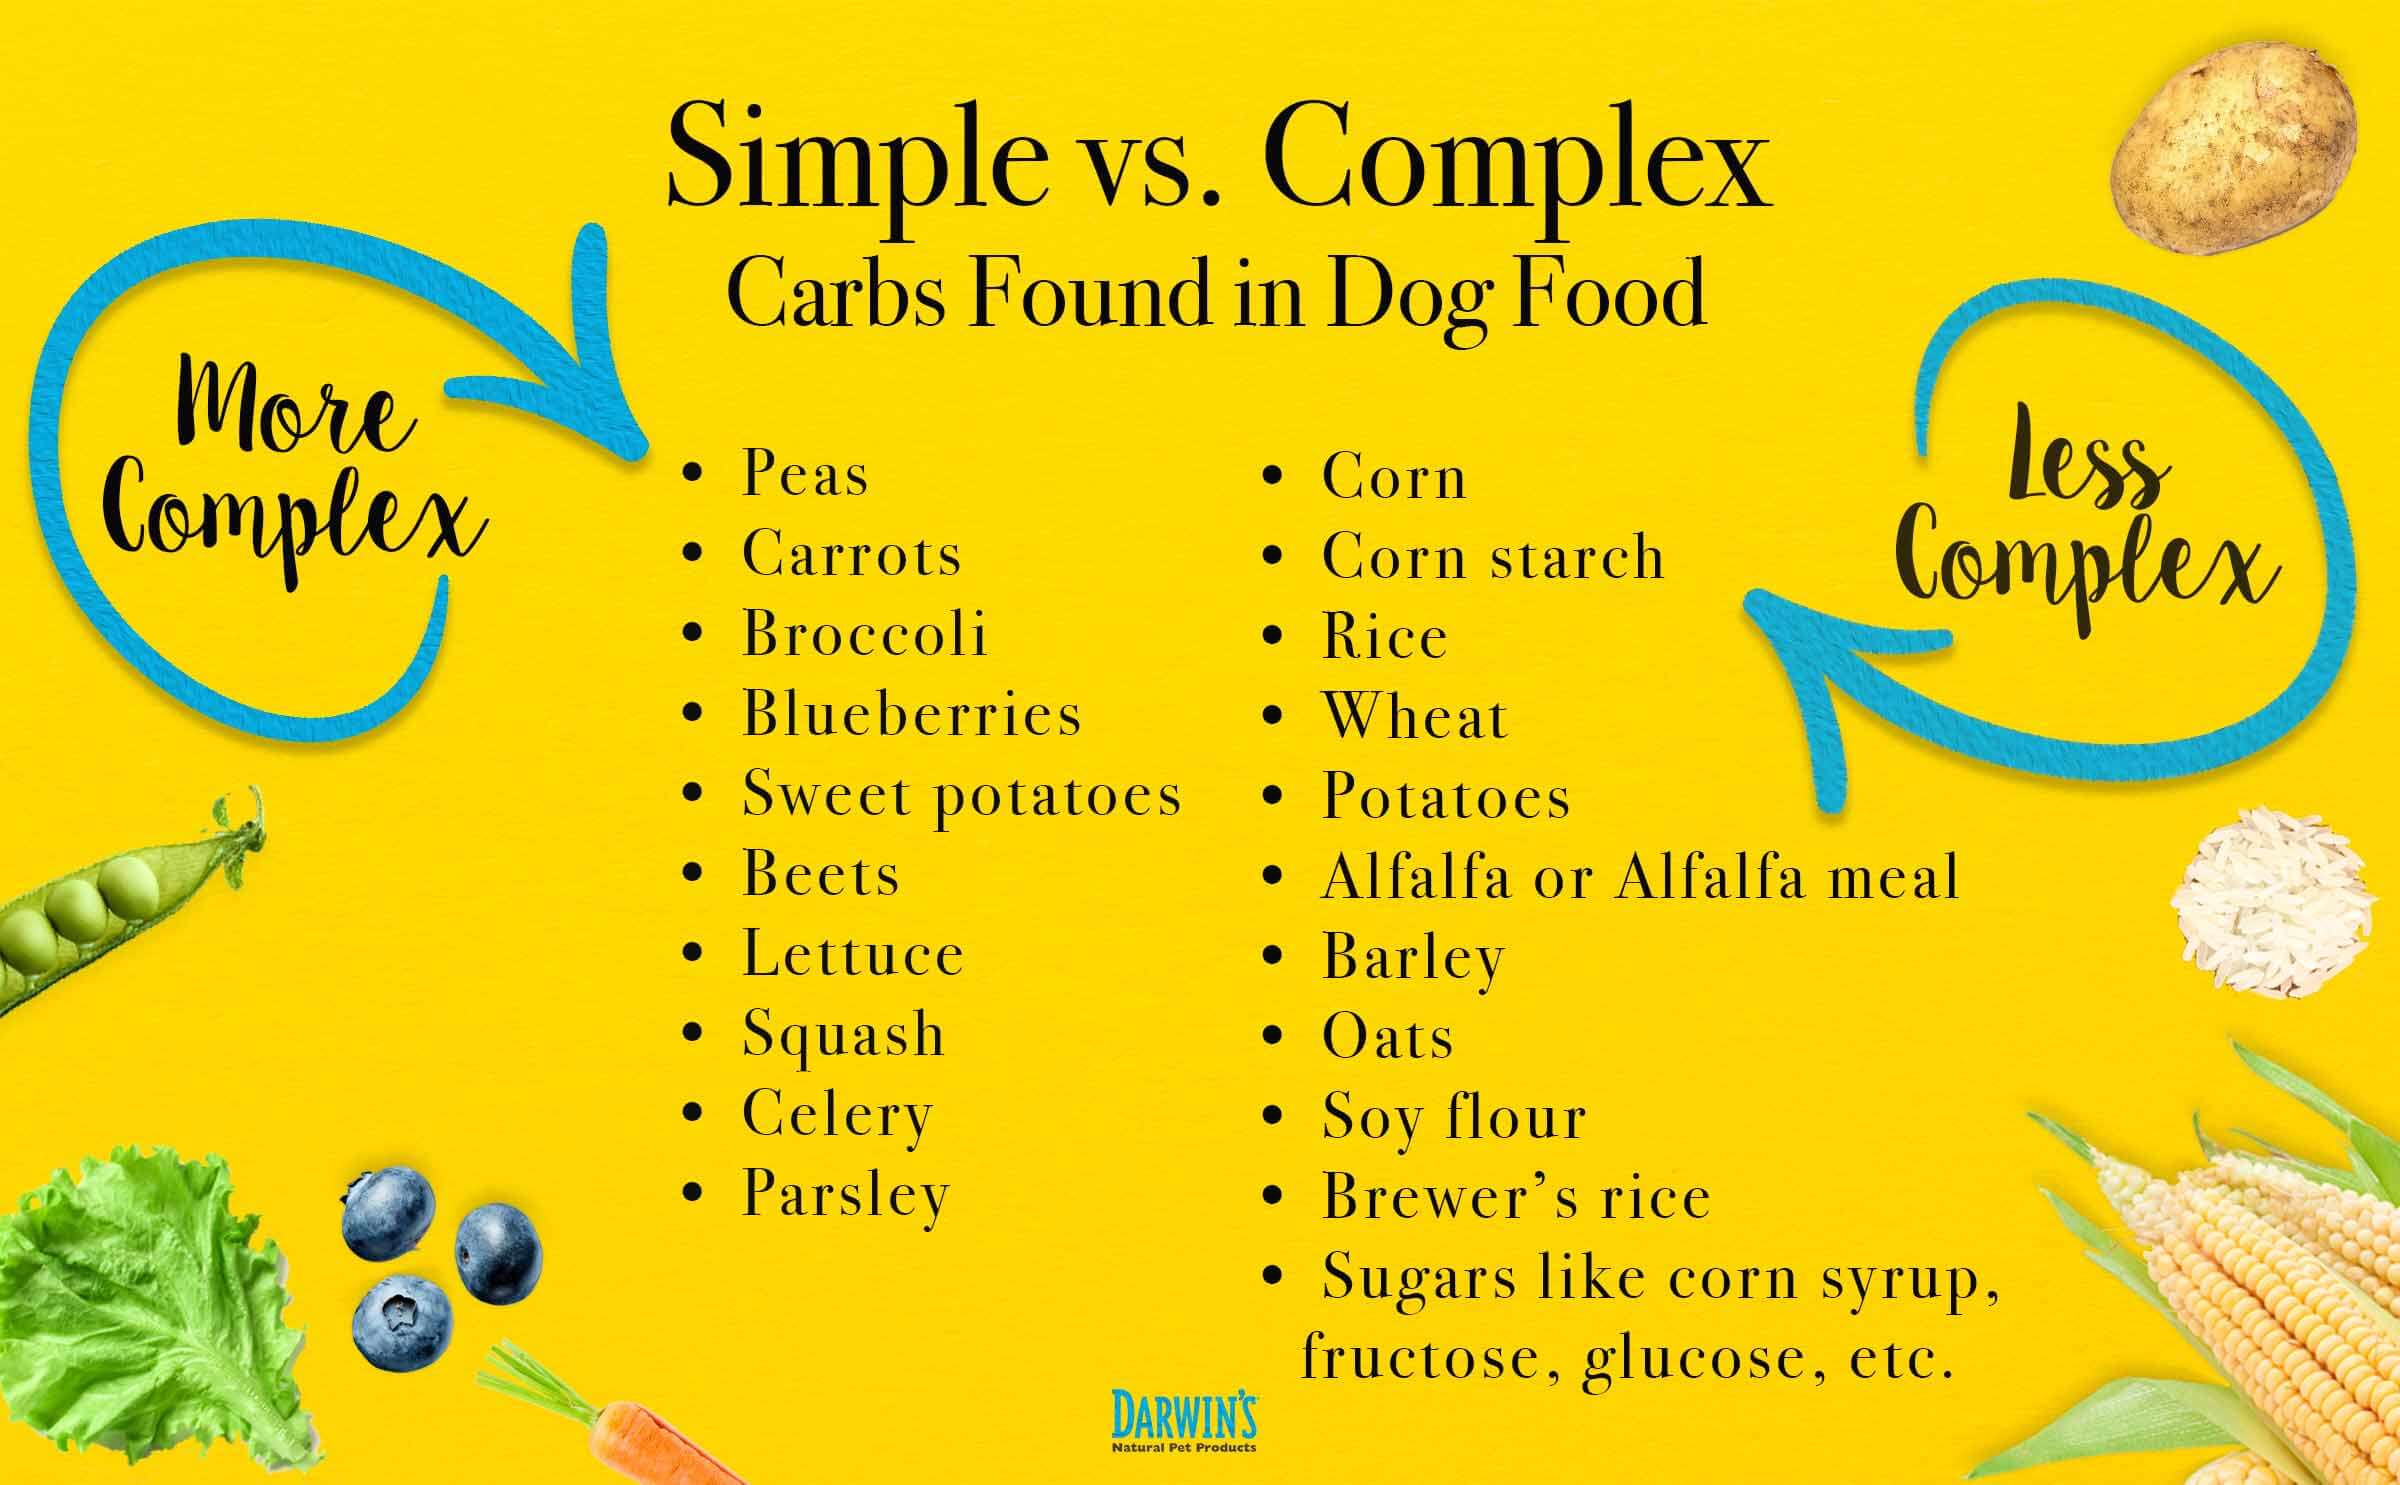 low-carb dog food - simple carbohydrates compared to complex carbohydrates list